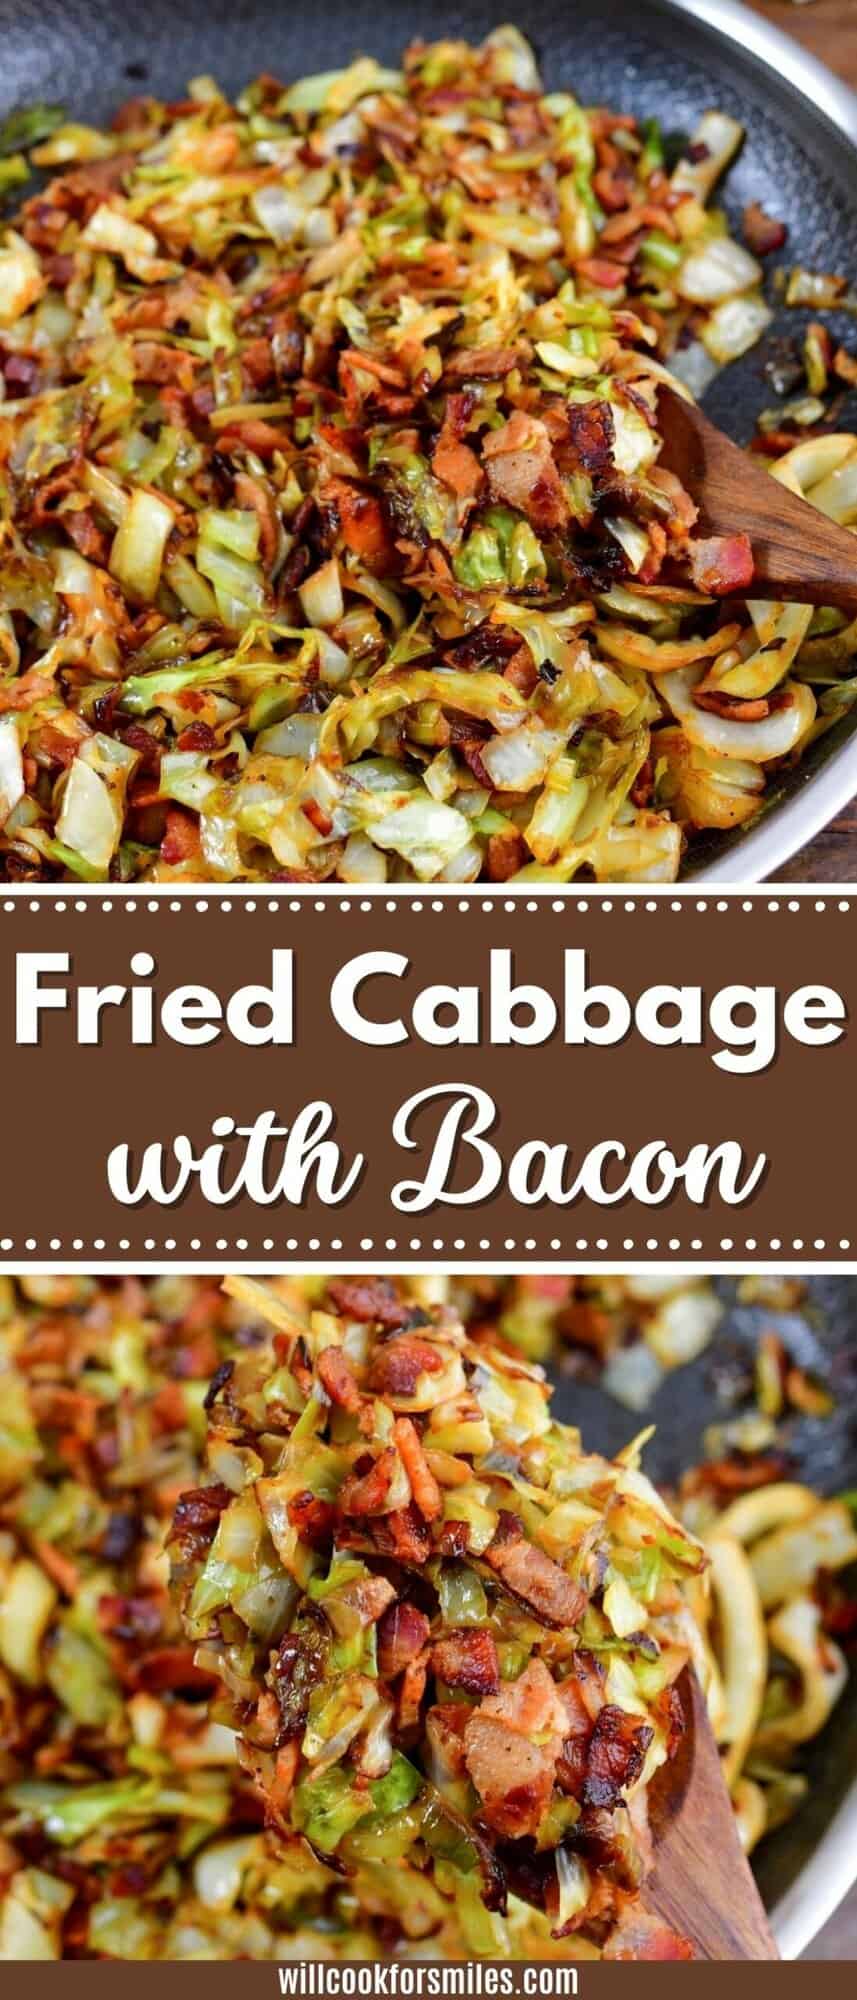 collage of two images of fried cabbage and title in the middle.